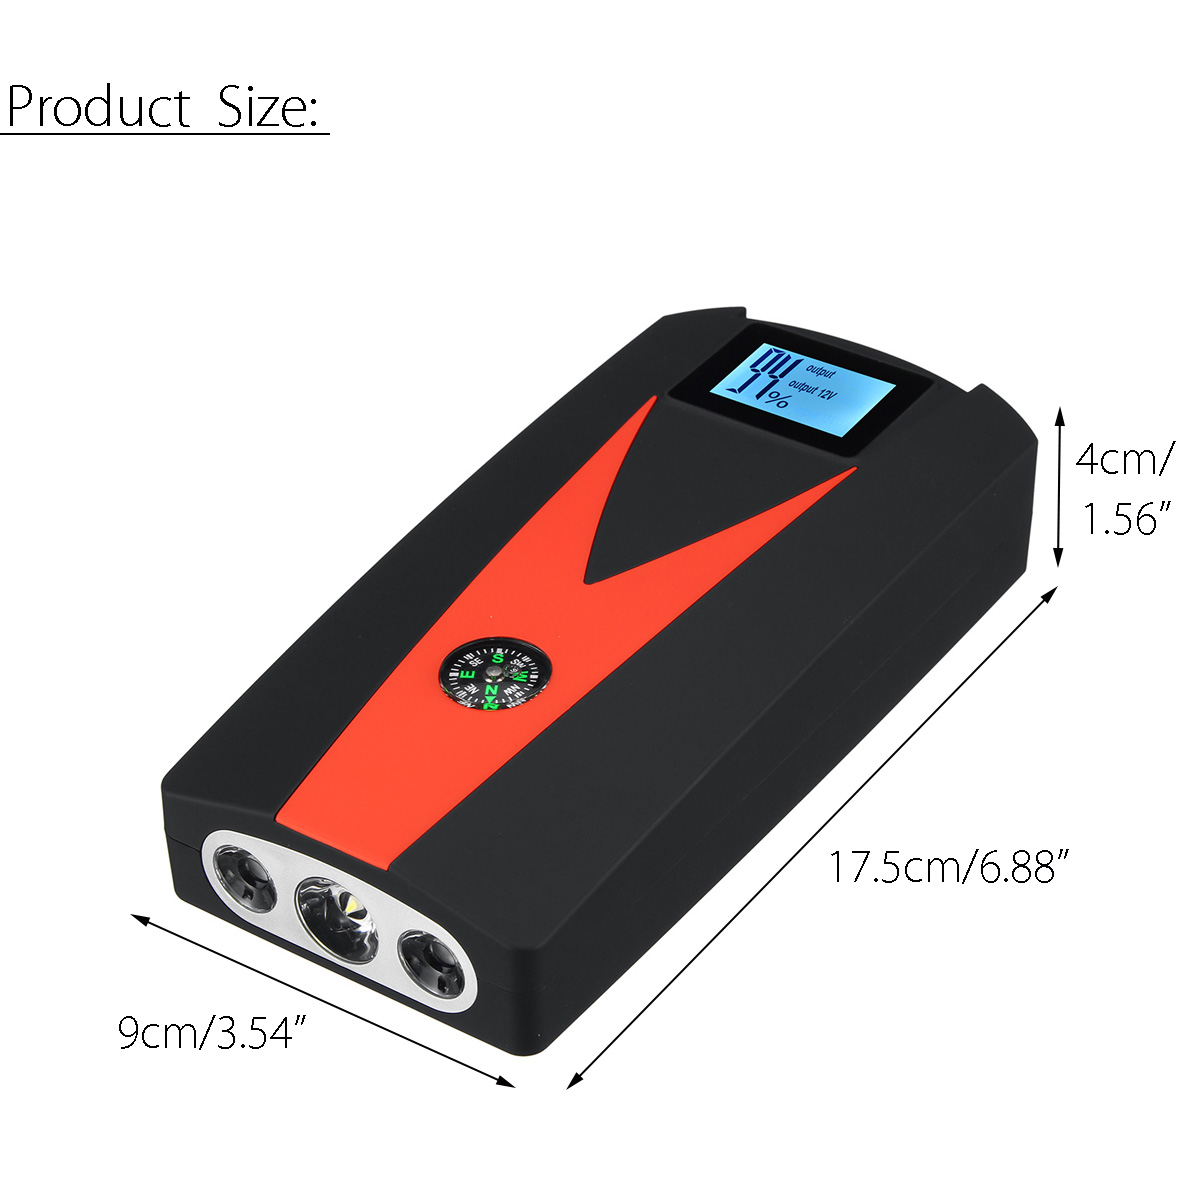 99900-mAh-Dual-USB-Car-Jump-Starter-LCD-Auto-Battery-Booster-Portable-Power-Pack-with-Jumper-Cables-1421905-11